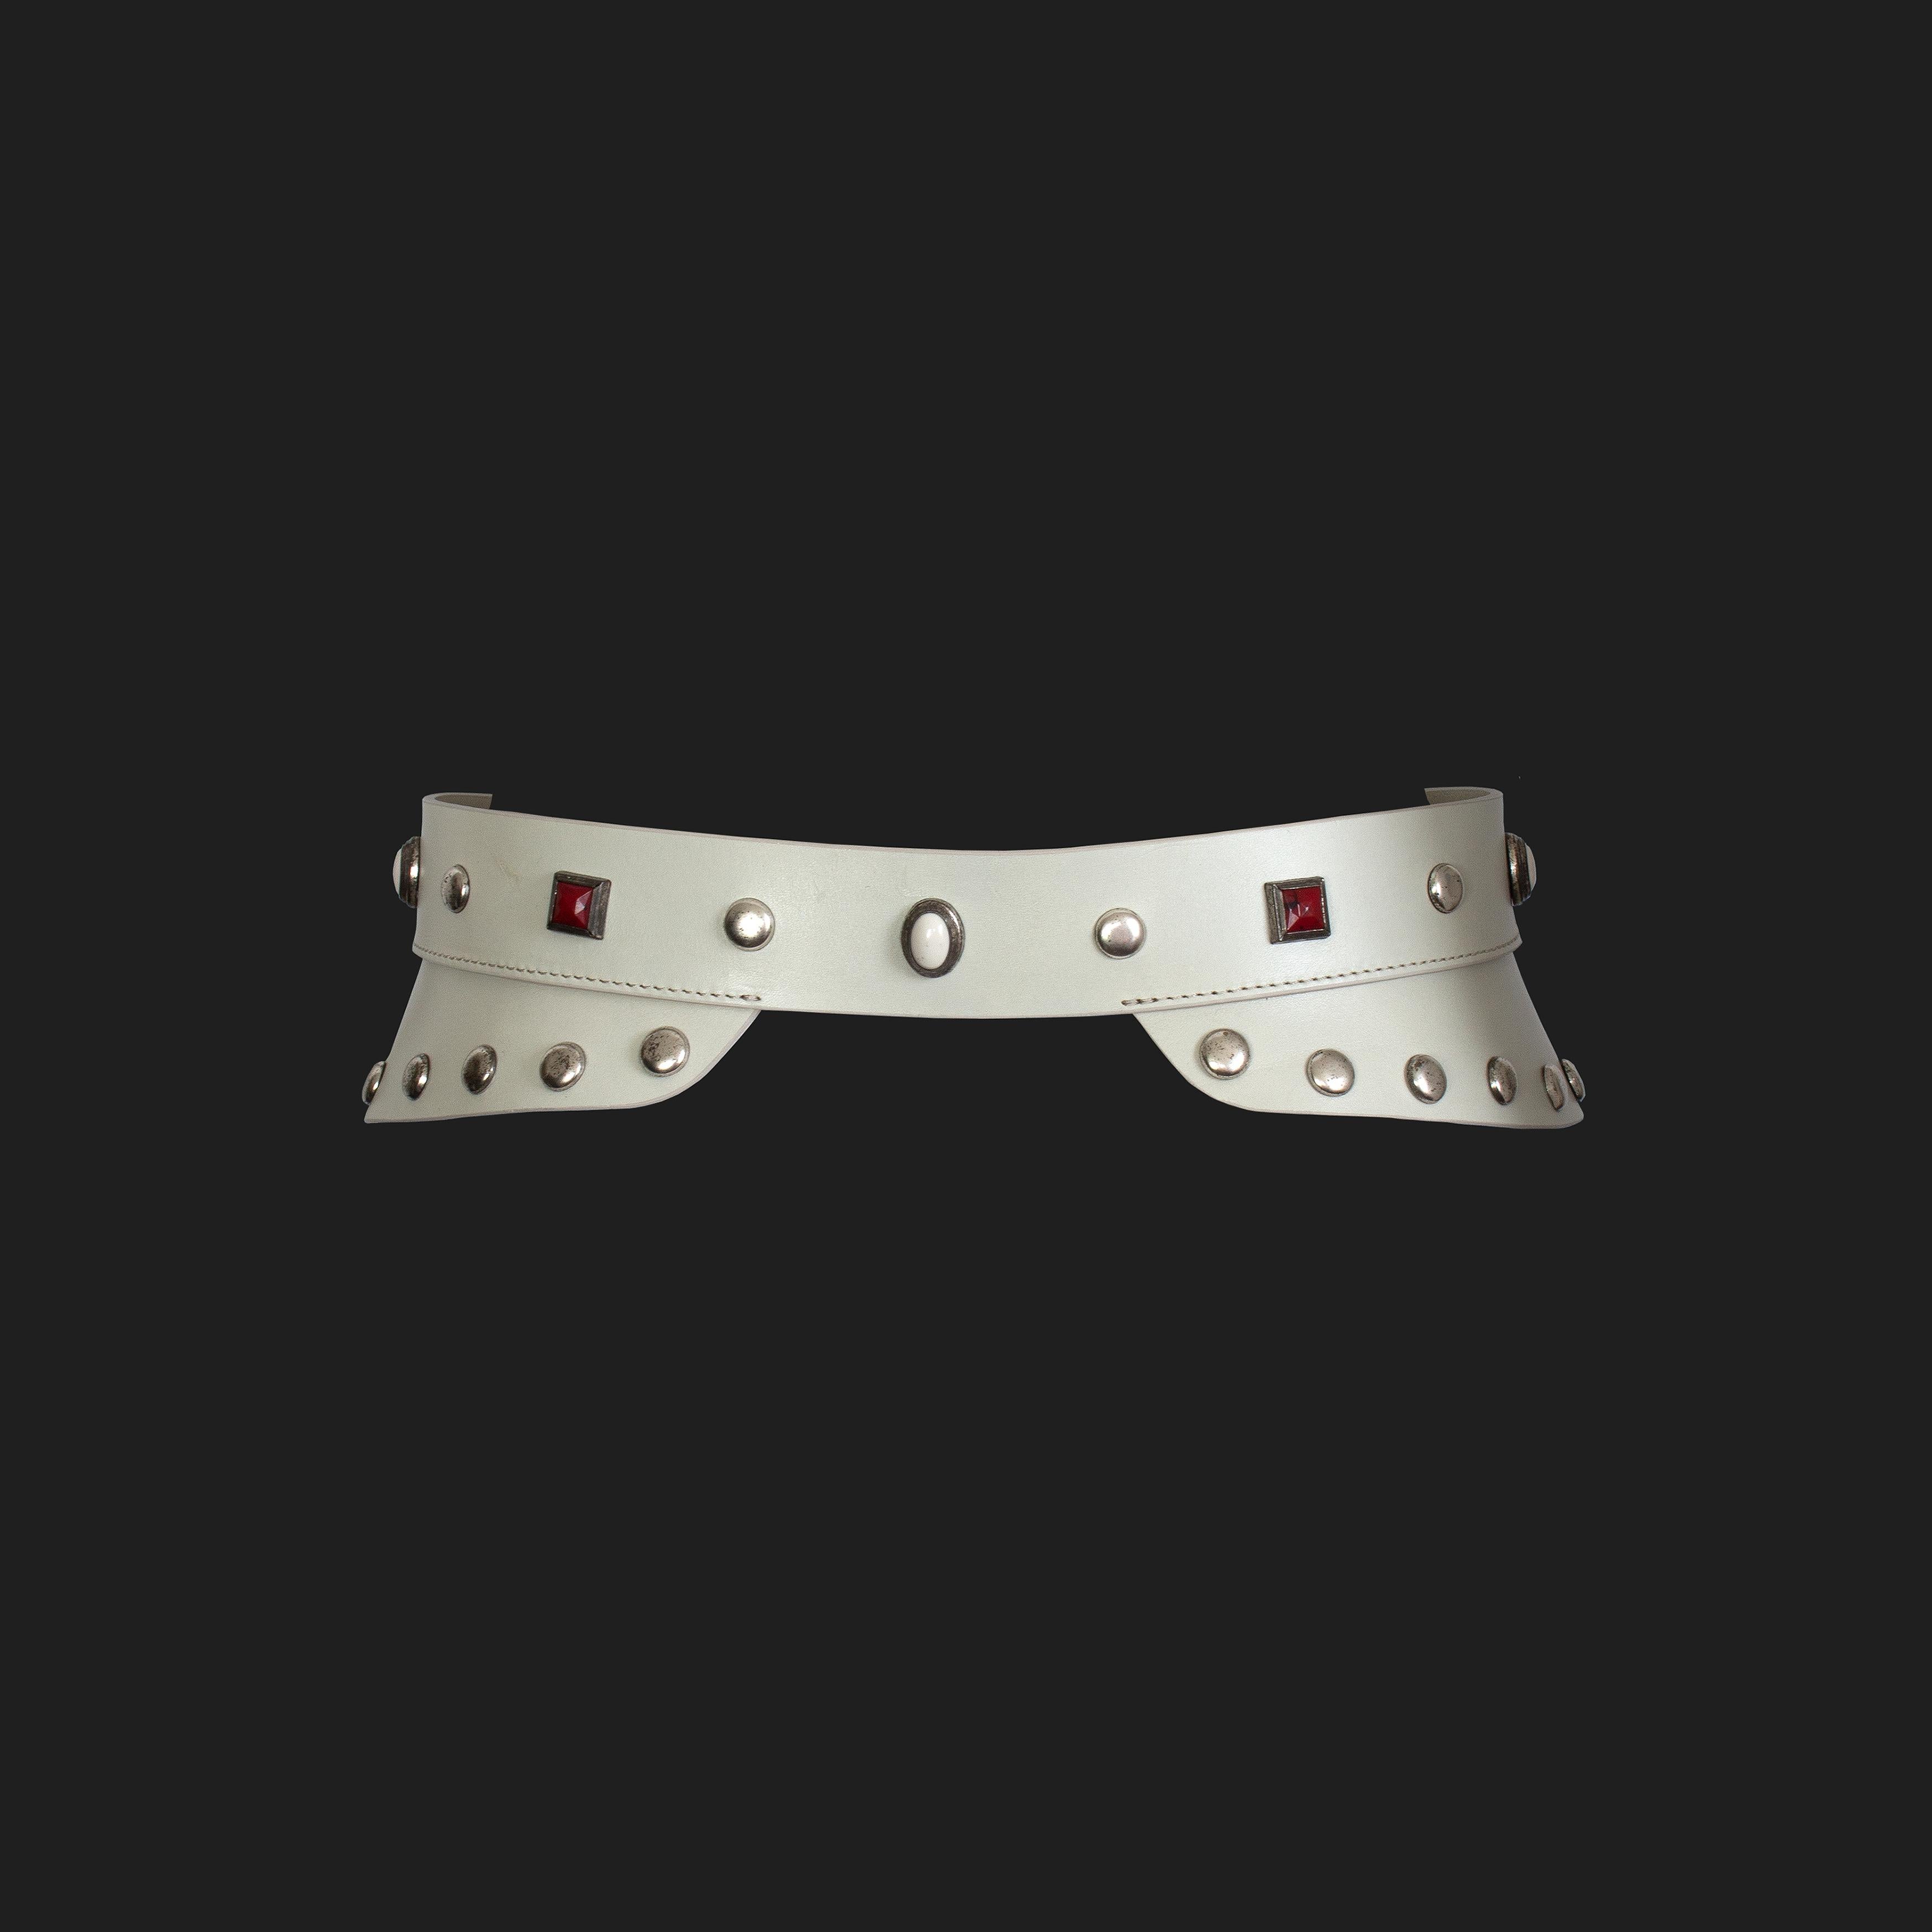 Product Details: Isabel Marant - Belt - Ecru Leather - Stainless Steel Studs - Deep Red + White Beading Throughout - Stainless Steel Buckle Fasten 
Label: Isabel Marant  
Fabric Content: Ecru Leather - Stainless Steel Studs - Deep Red + White